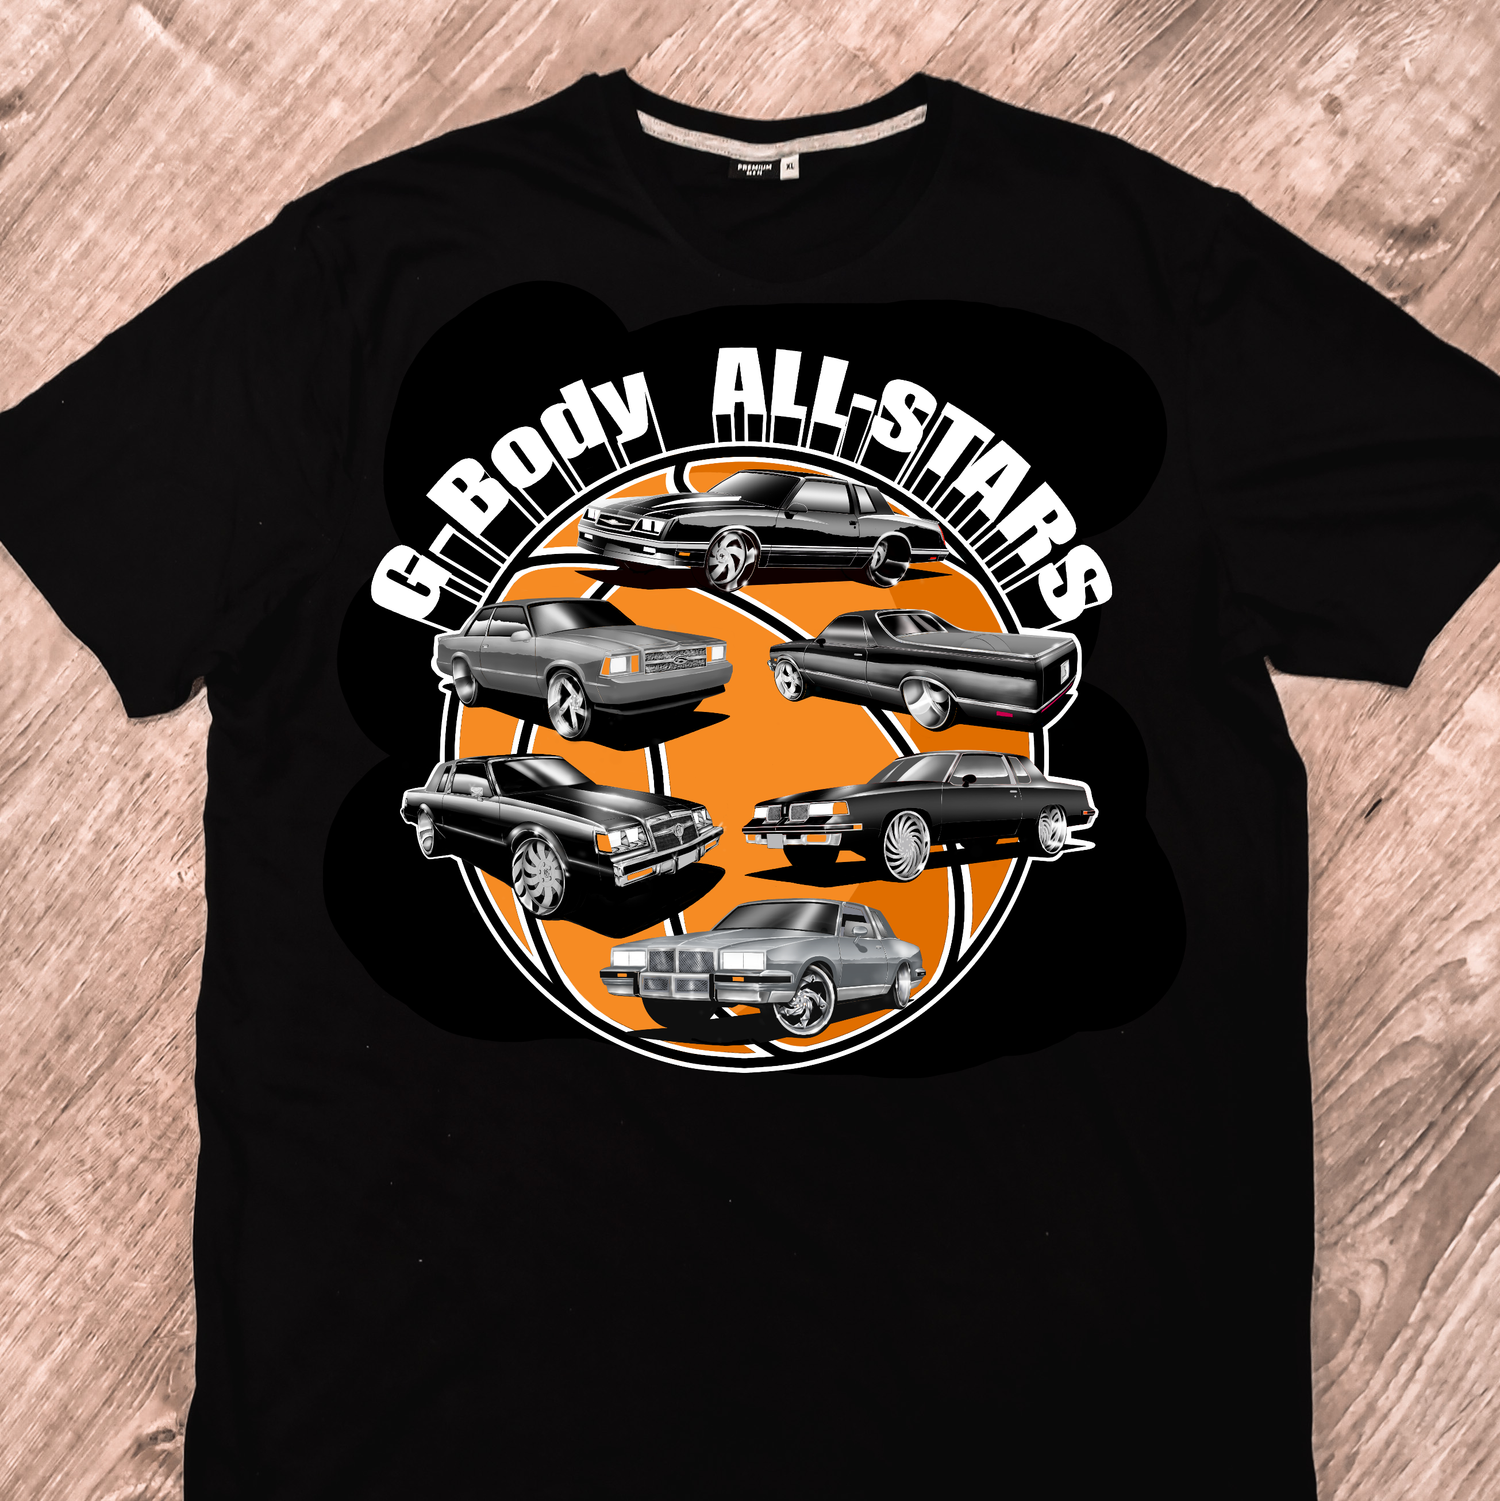 A T-shirt featuring an Oldsmobile Cutlass Supreme, El Camino, Monte Carlo SS, Pontiac Grand Prix, Chevy Malibu, and a Buick Regal. All cars are on 24-inch wheels.